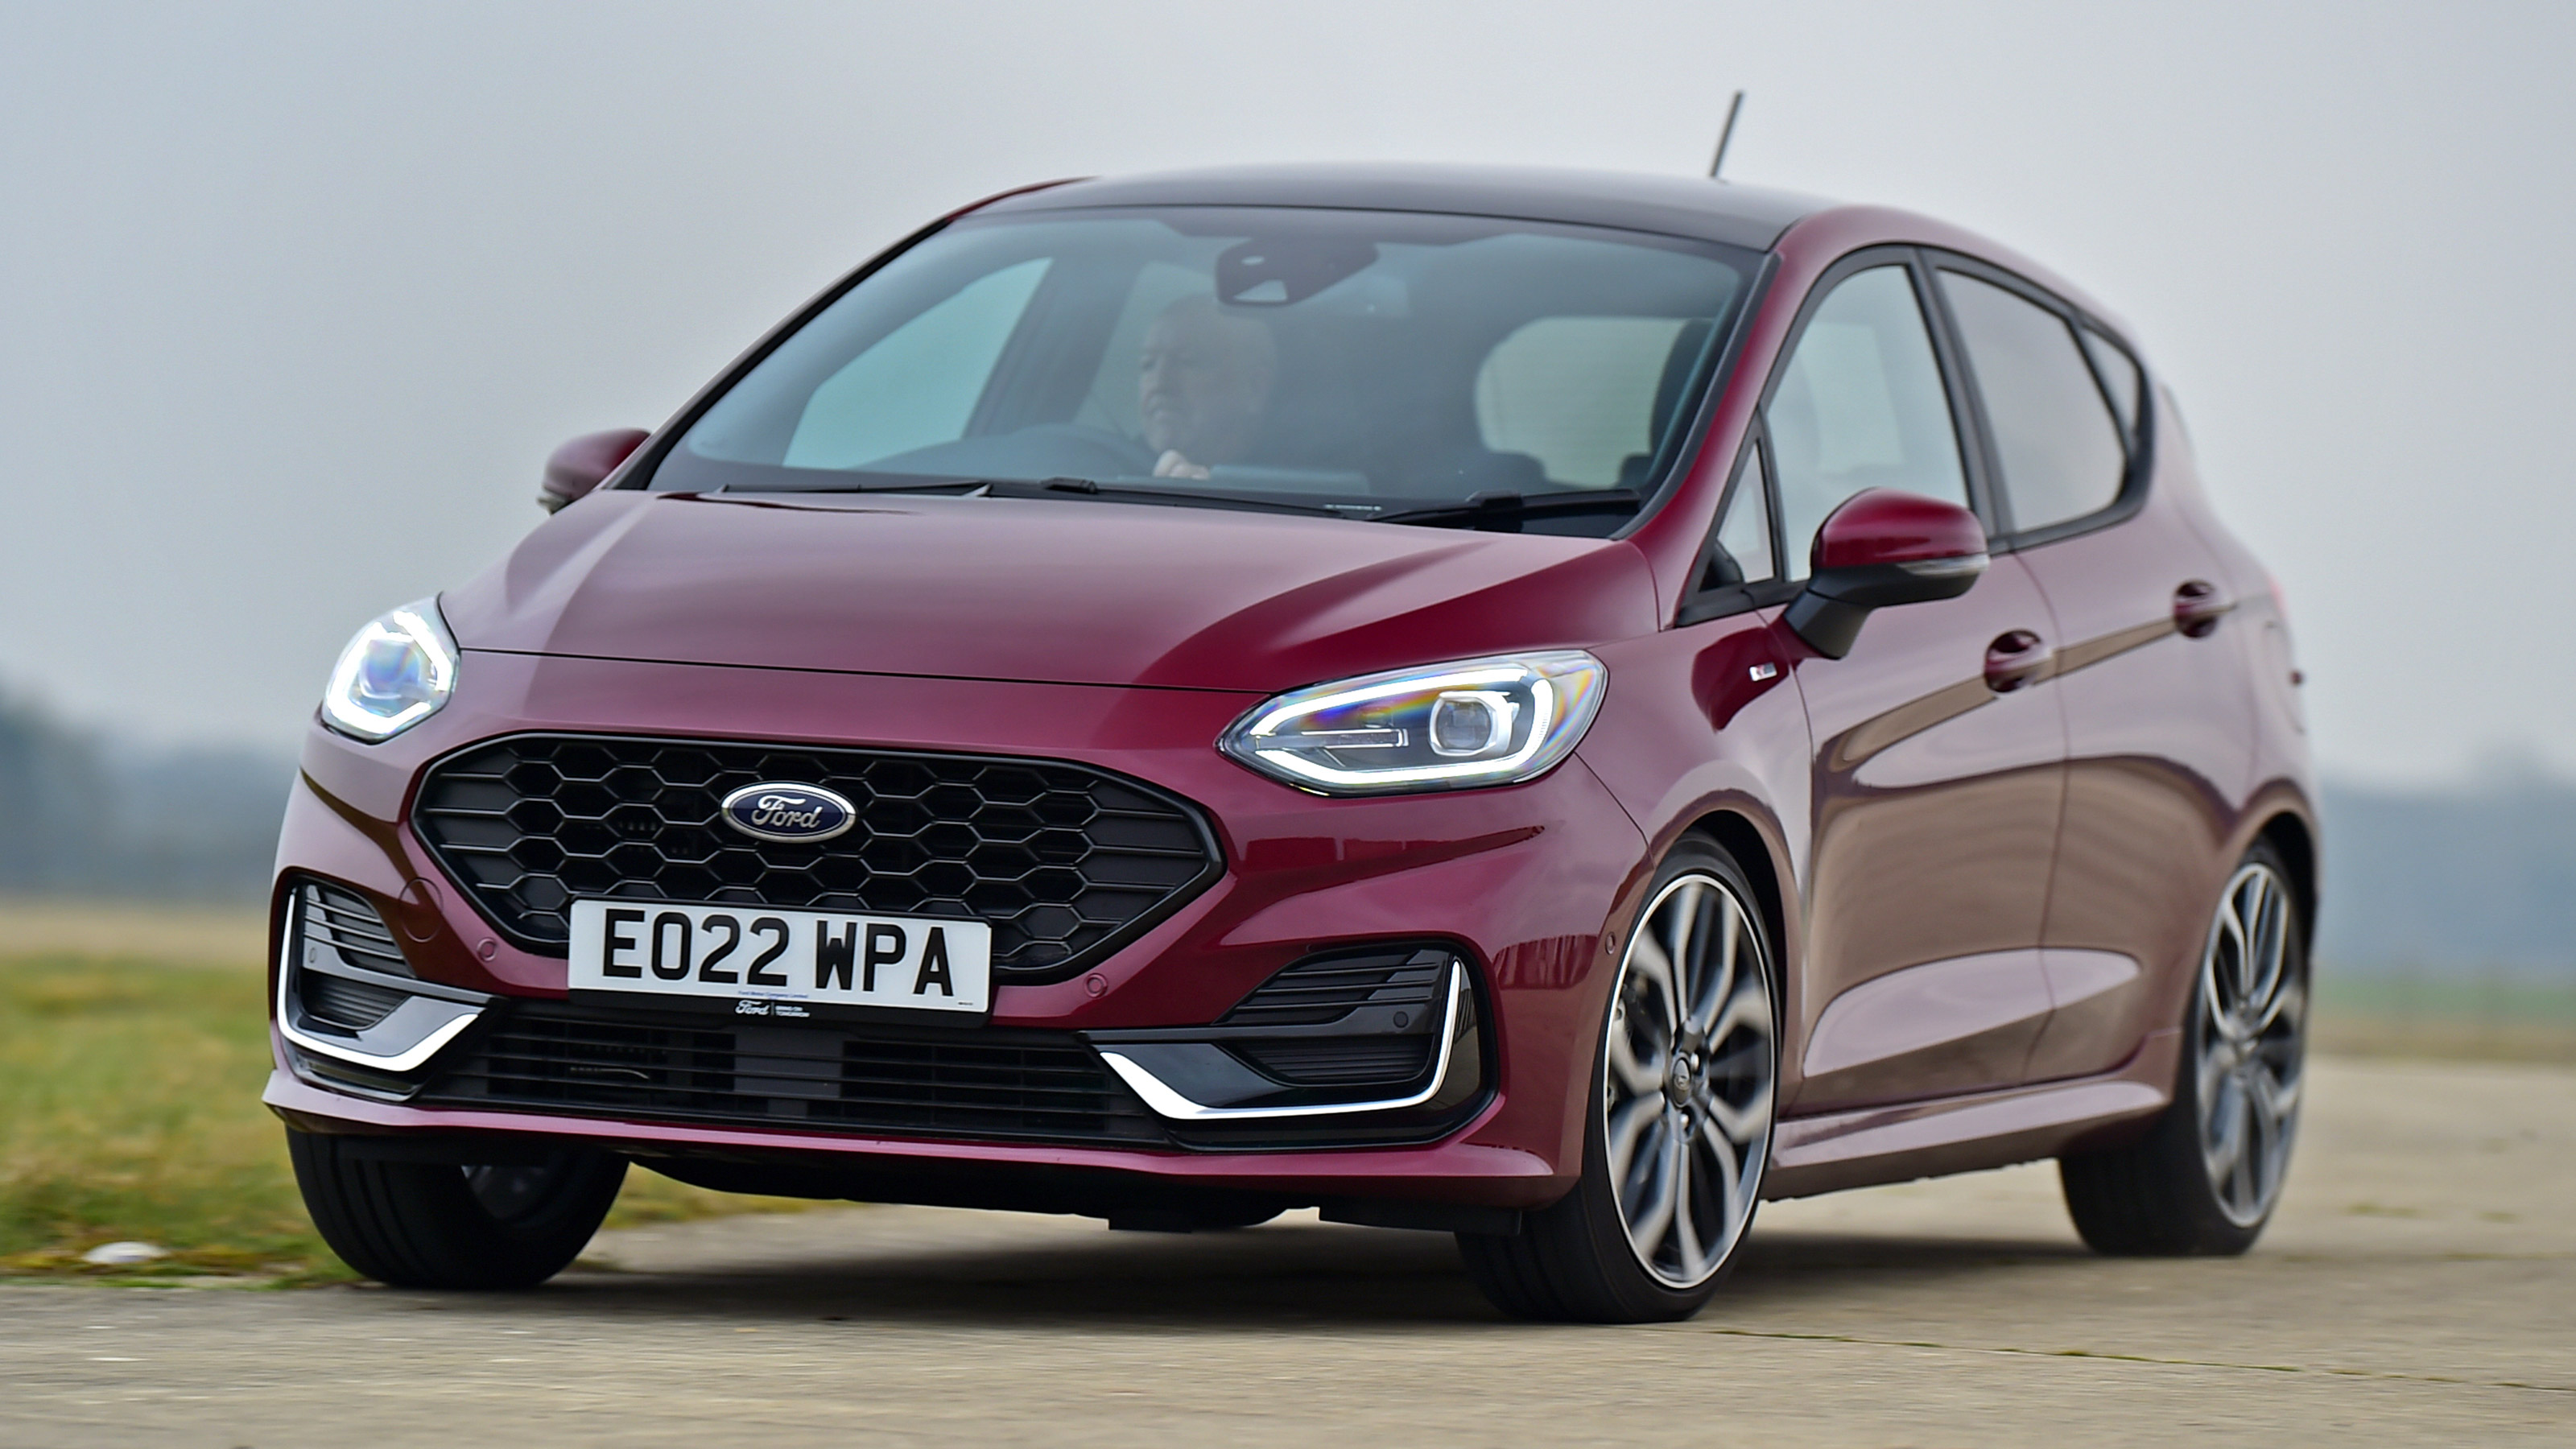 Ford Fiesta [MK7] (2017 - 2020) used car review, Car review